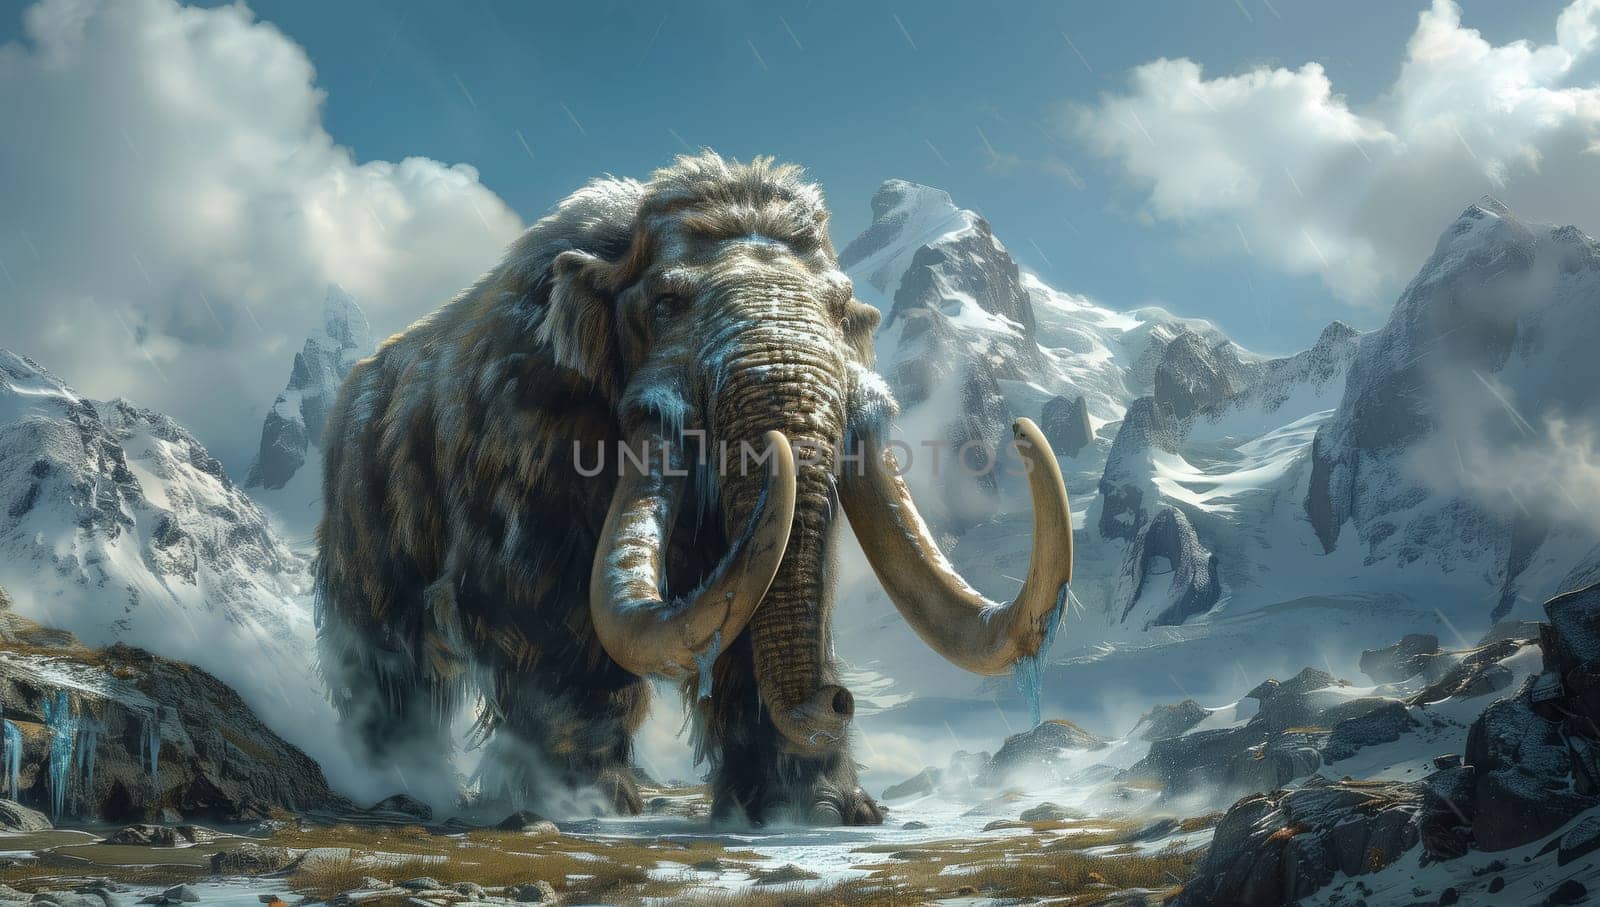 A terrestrial animal, the mammoth, is standing in the snow in the natural landscape of the mountains, with clouds hovering above and water nearby